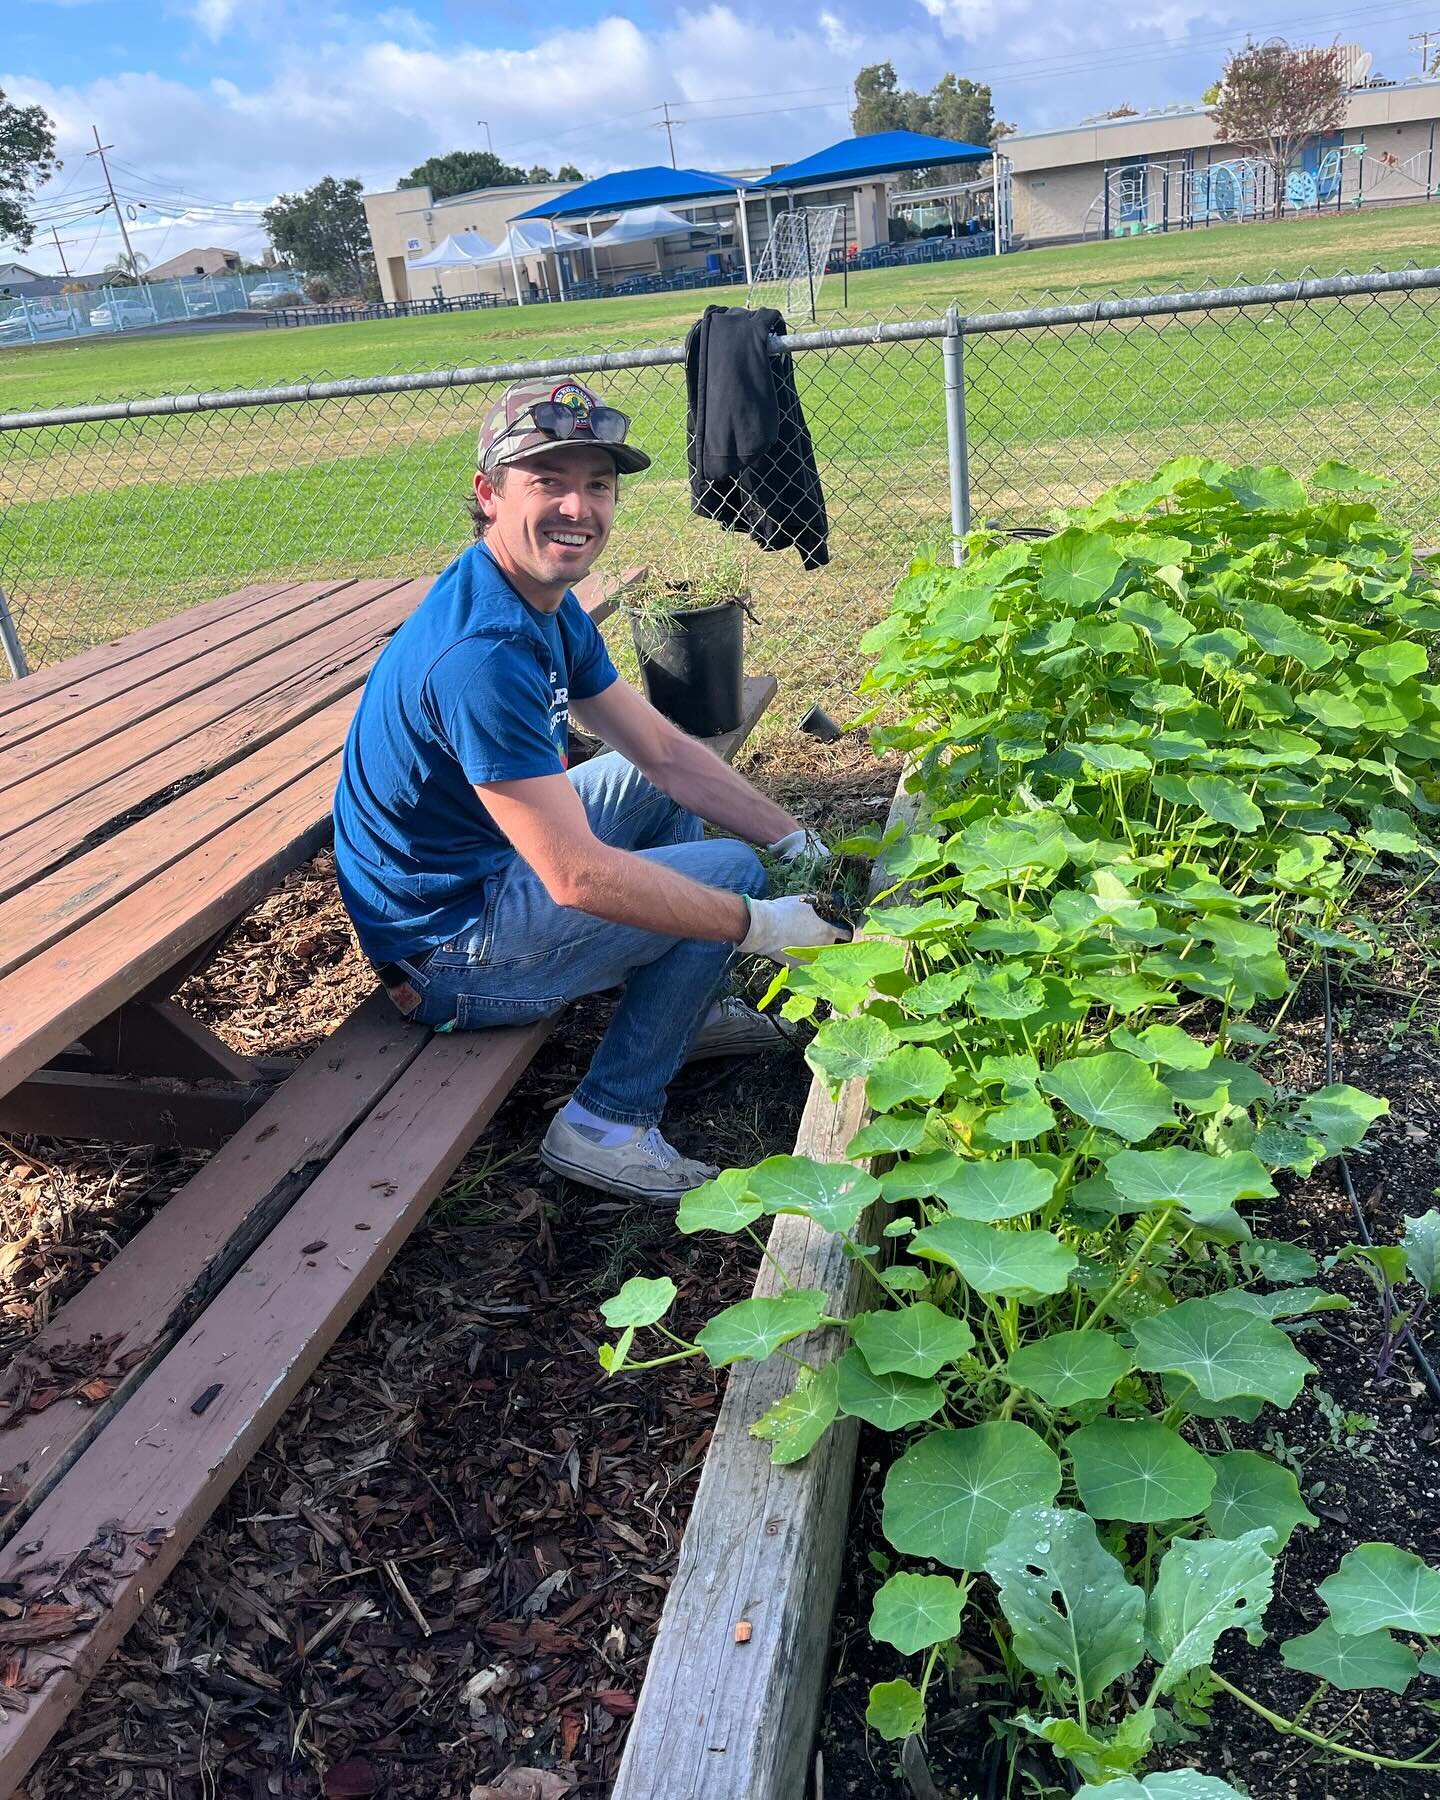 We had such a productive Garden Community Day! Thank you to the families, @sagegardenproject and @bckprograms for all of their hard work! Mr Horton is all set with a refreshed garden space 🌱